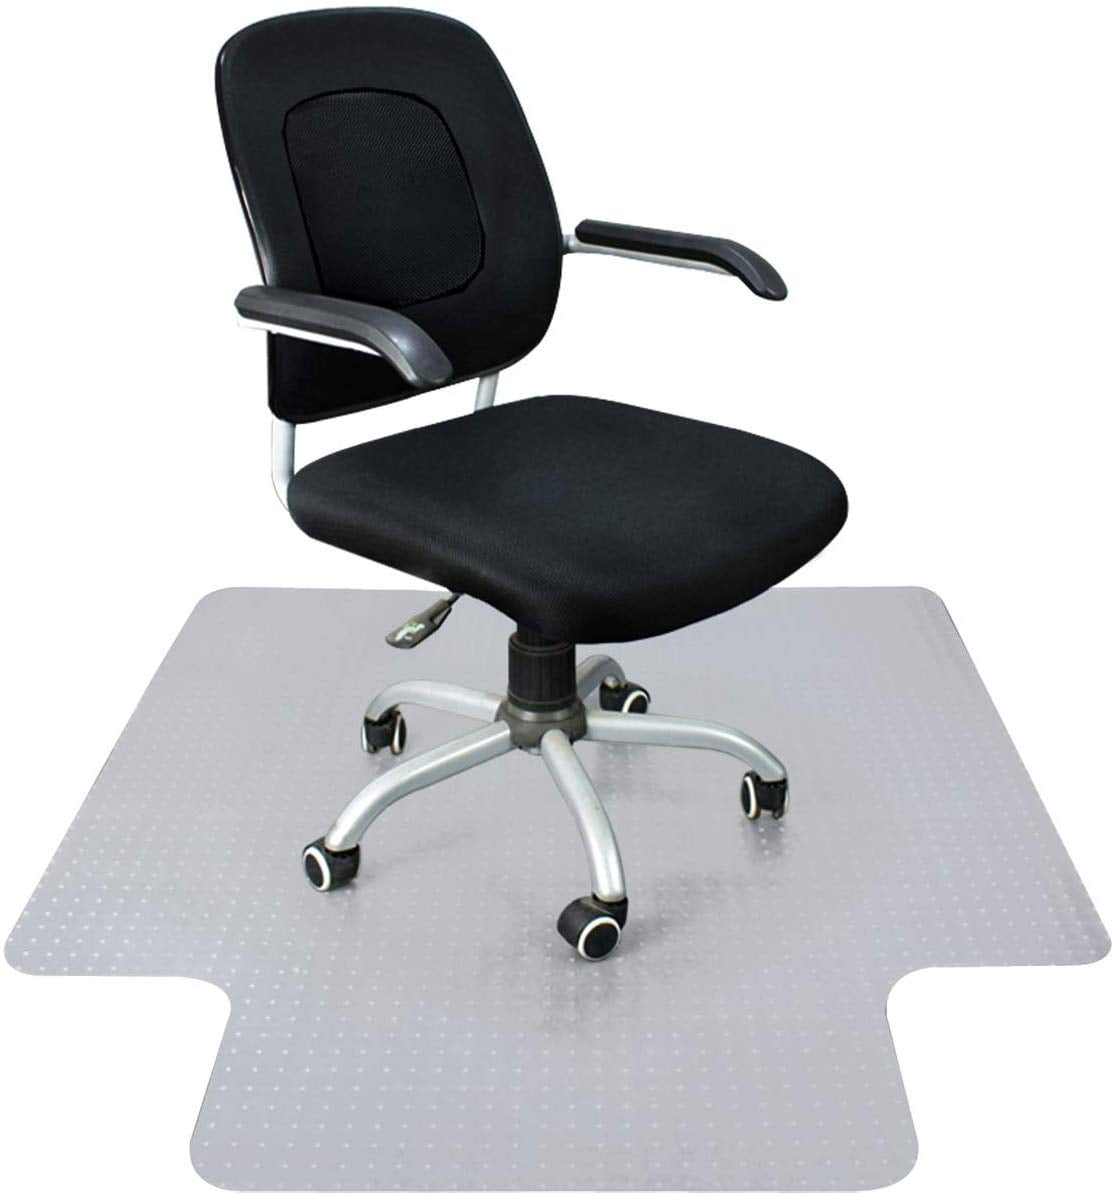 48" x 36" Heavy Duty Office Home Study Standard Pile Carpet Protector Chair Mat 